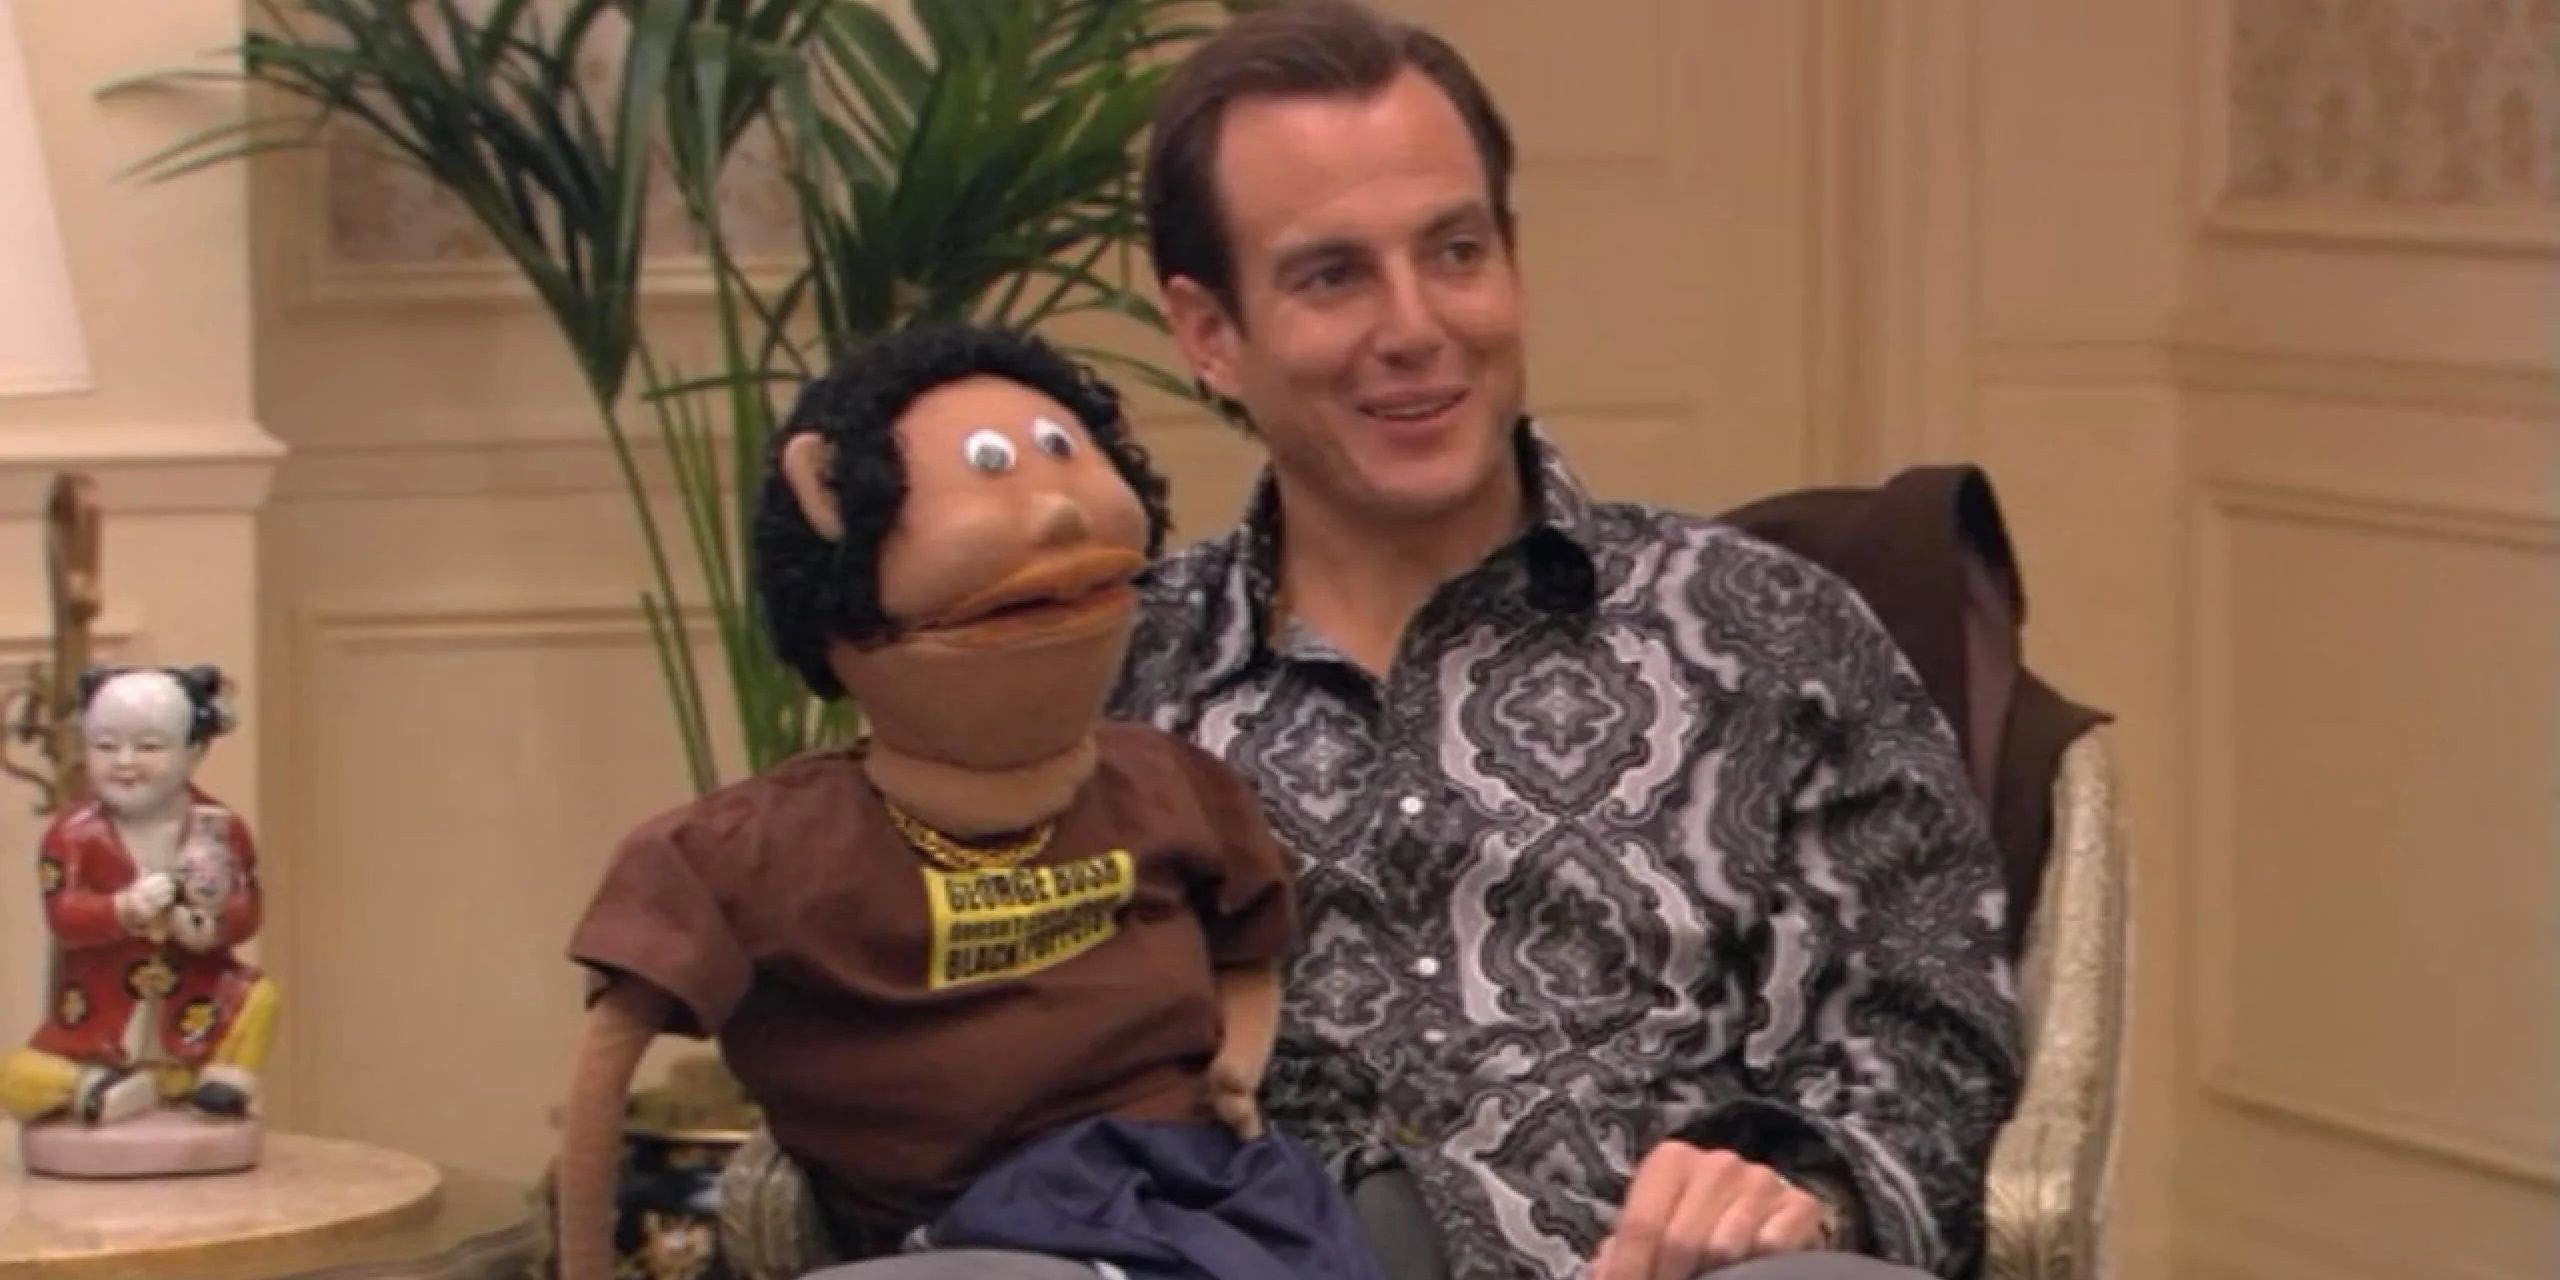 Will Arnett as Gob voices Franklin the puppet in Arrested Development